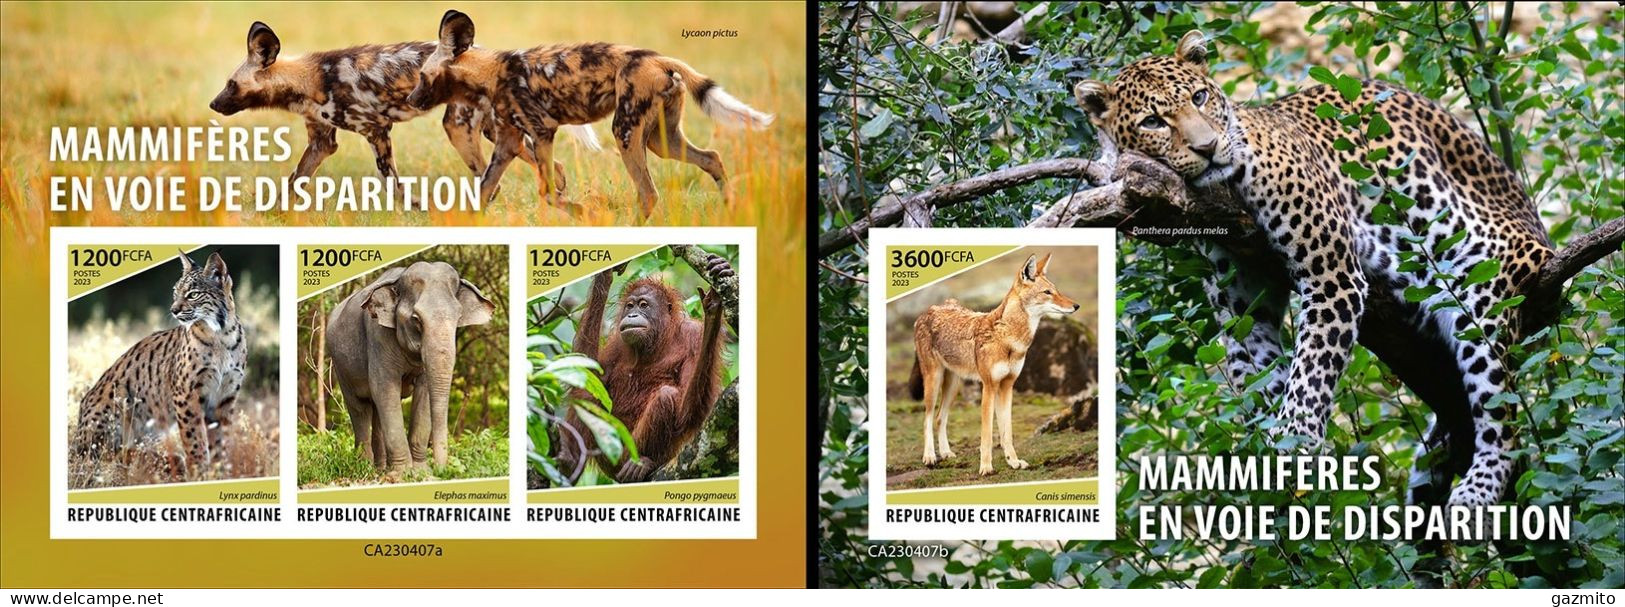 Centrafrica 2023, Animal In Danger, Wild Cat, 3val In BF+BF IMPERFORATED - Big Cats (cats Of Prey)